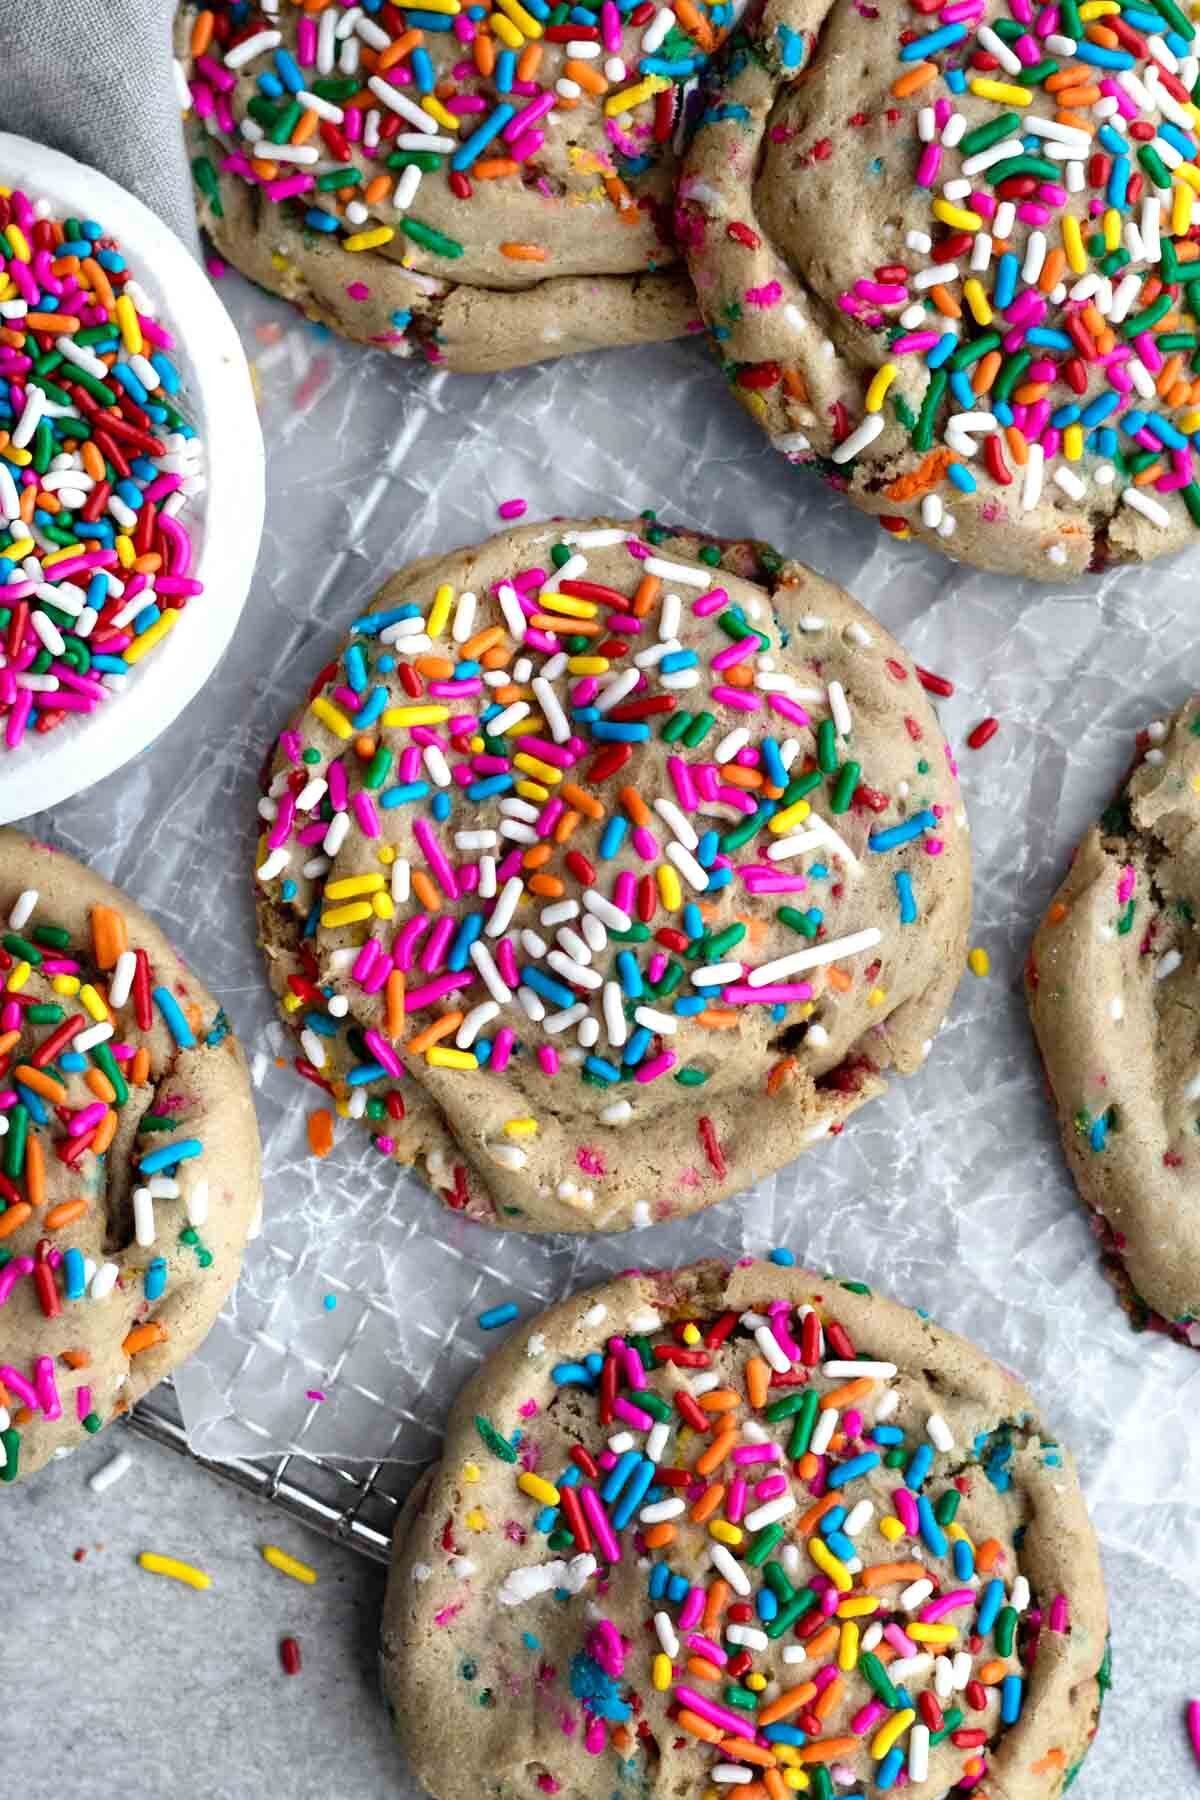 Looking down at six round cookies with sprinkles.